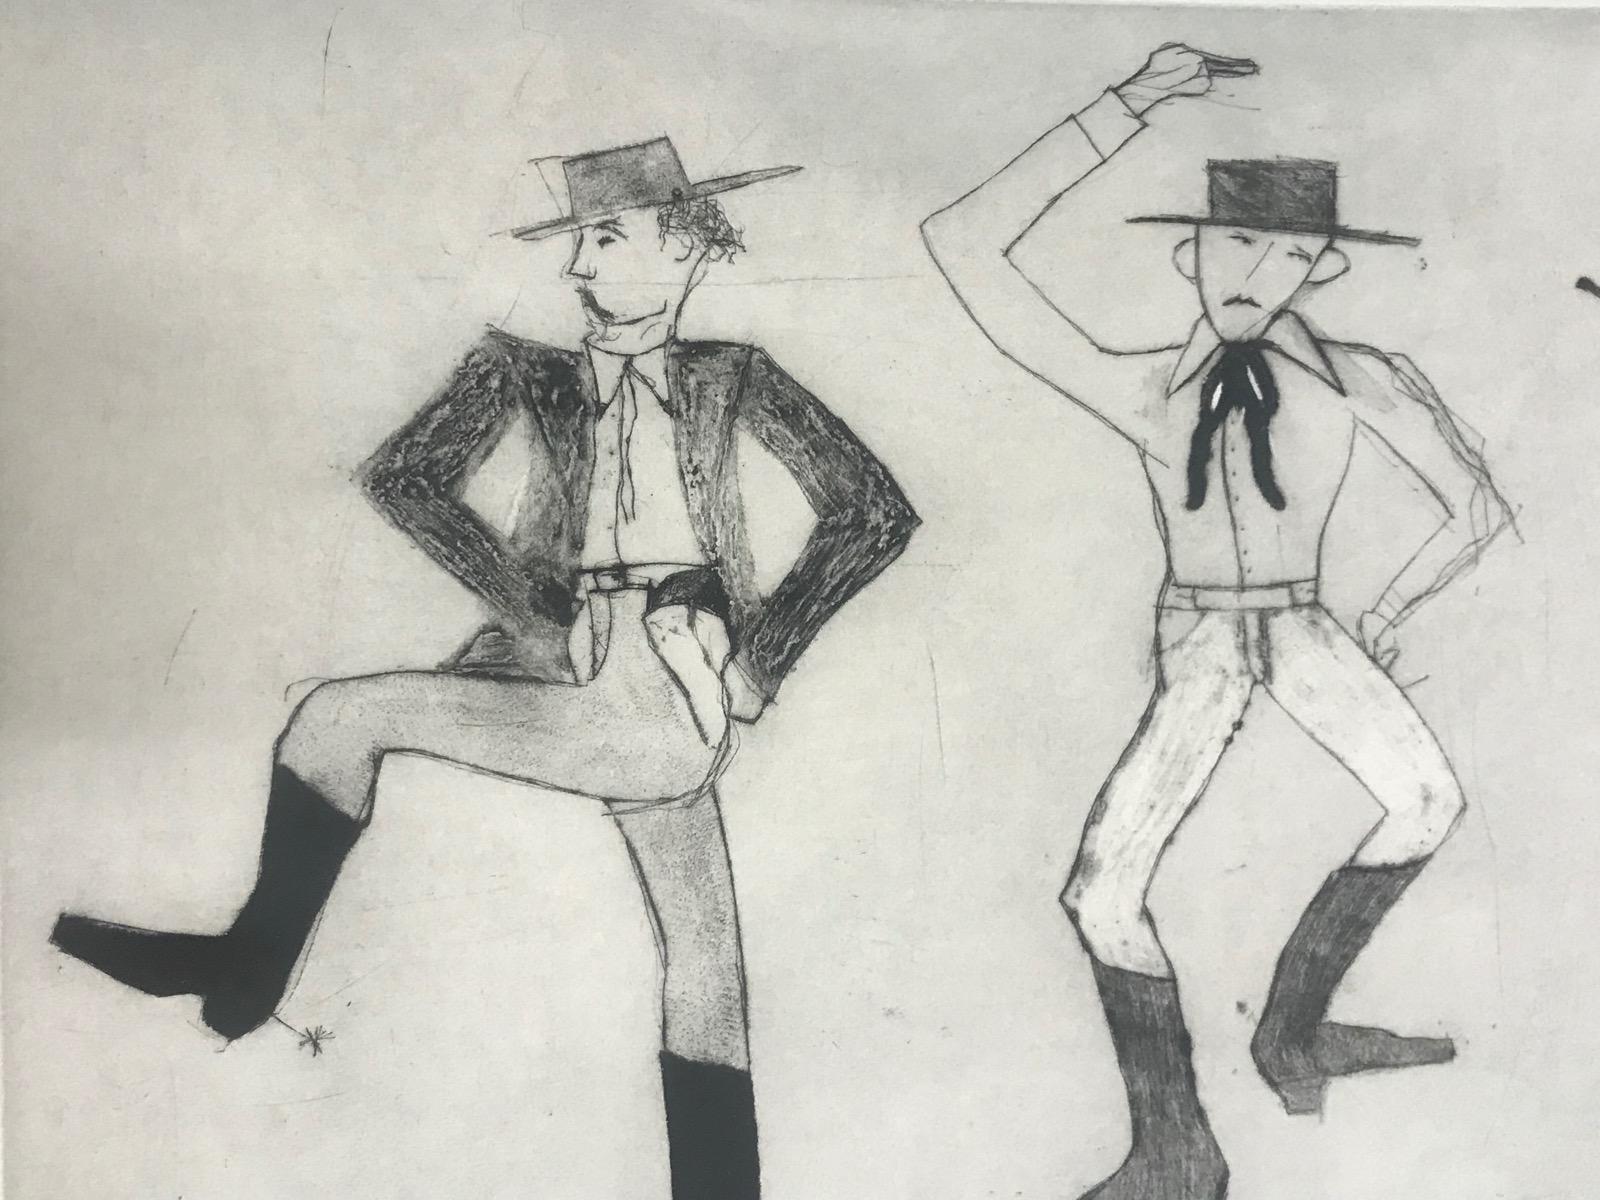 Cowboy dancers by Kate Boxer is a drypoint and carborundum print on paper.

Additional information:
Limited edition print
Edition of 30
Signed by artist and inscribed with edition number

Please note sheet size may differ

Image size: 
Height: 28cm